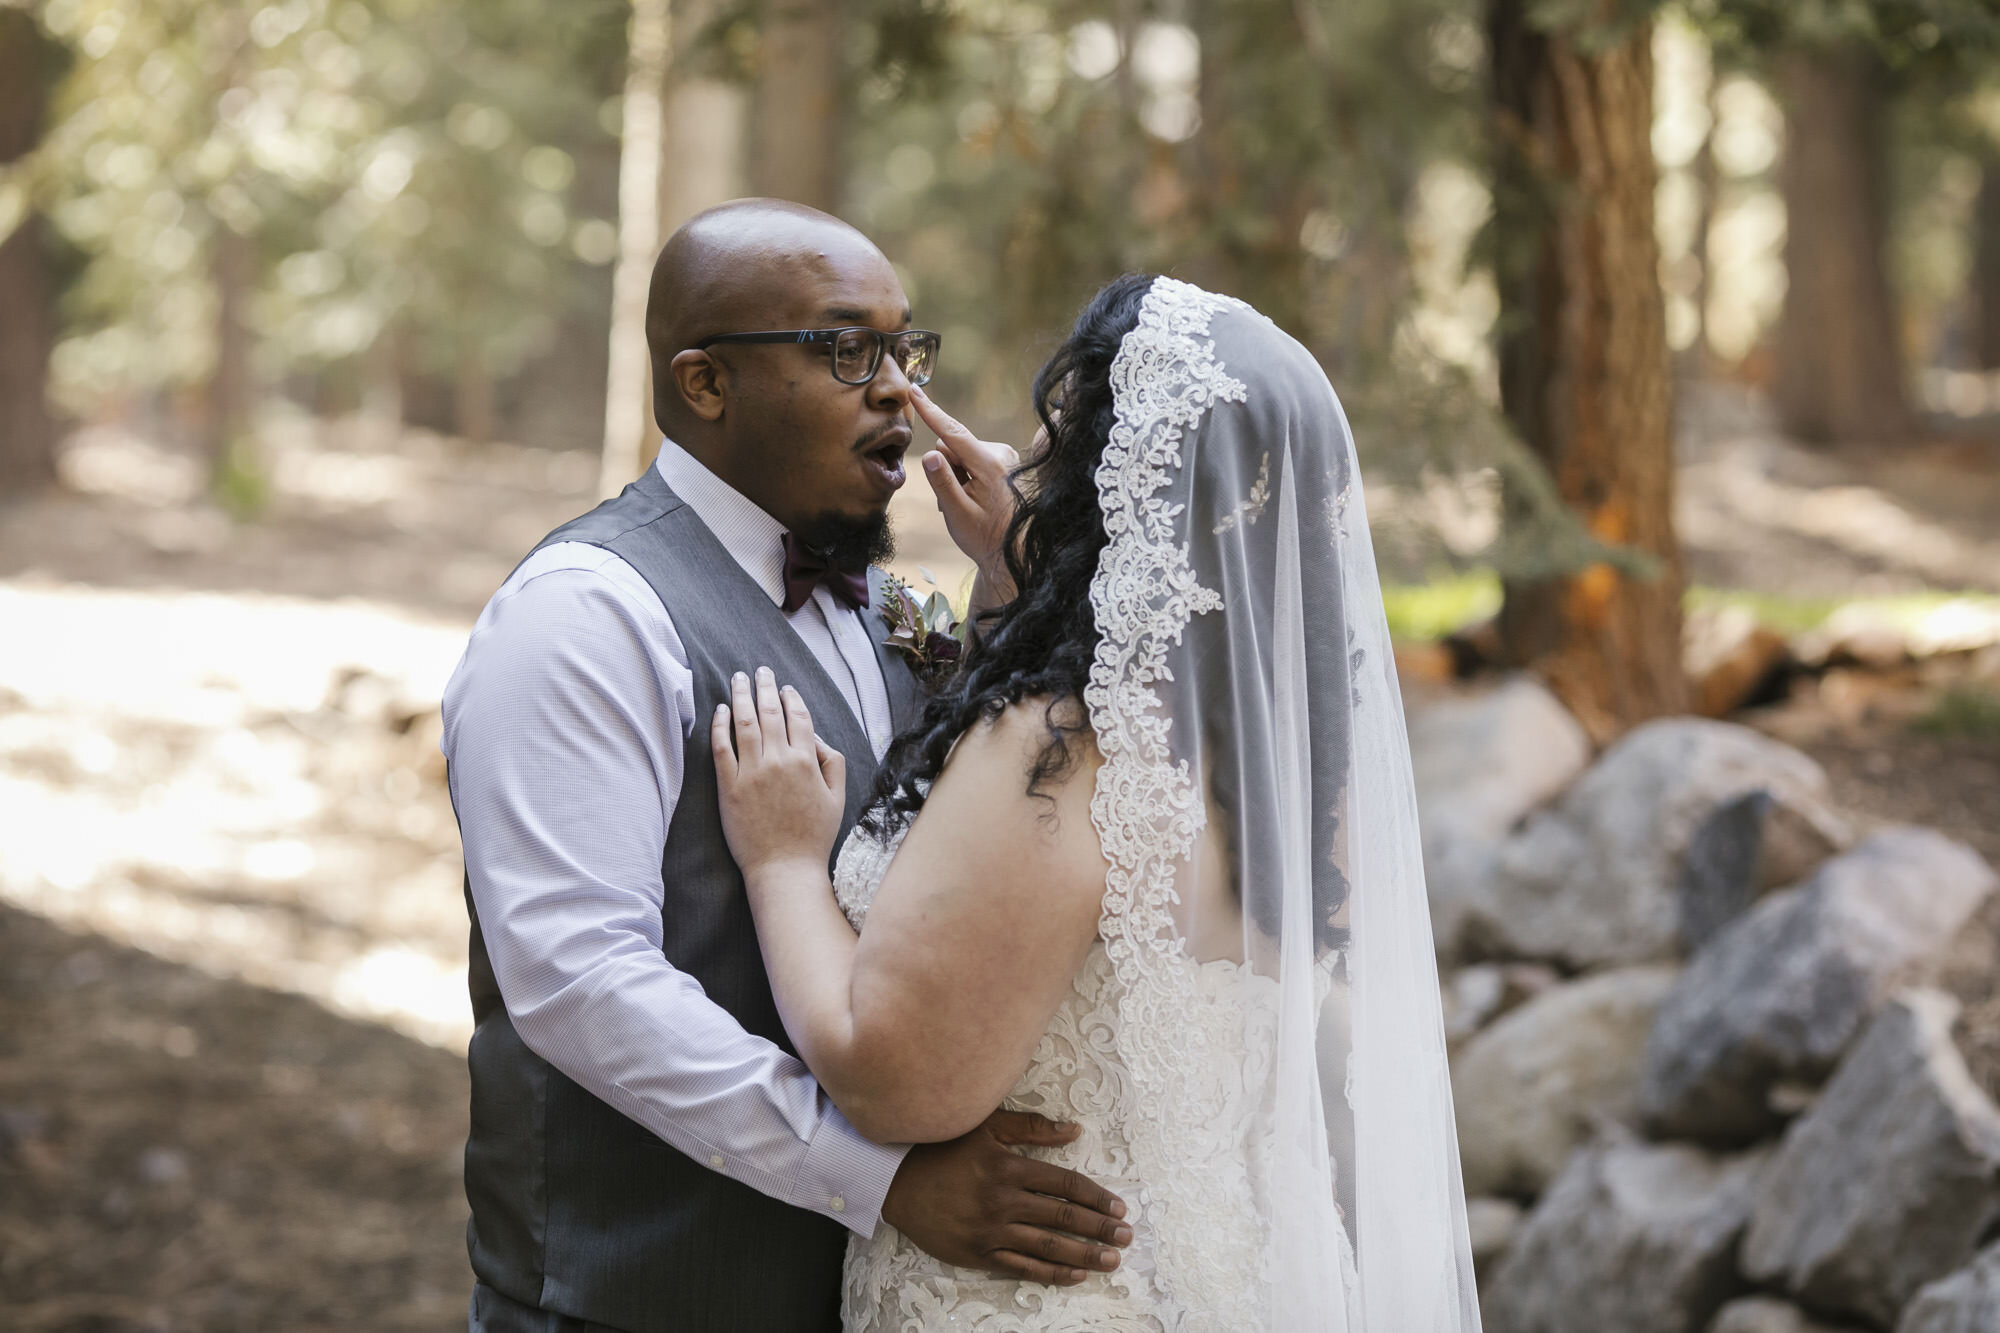 Bride surprises her groom by booping him on the nose